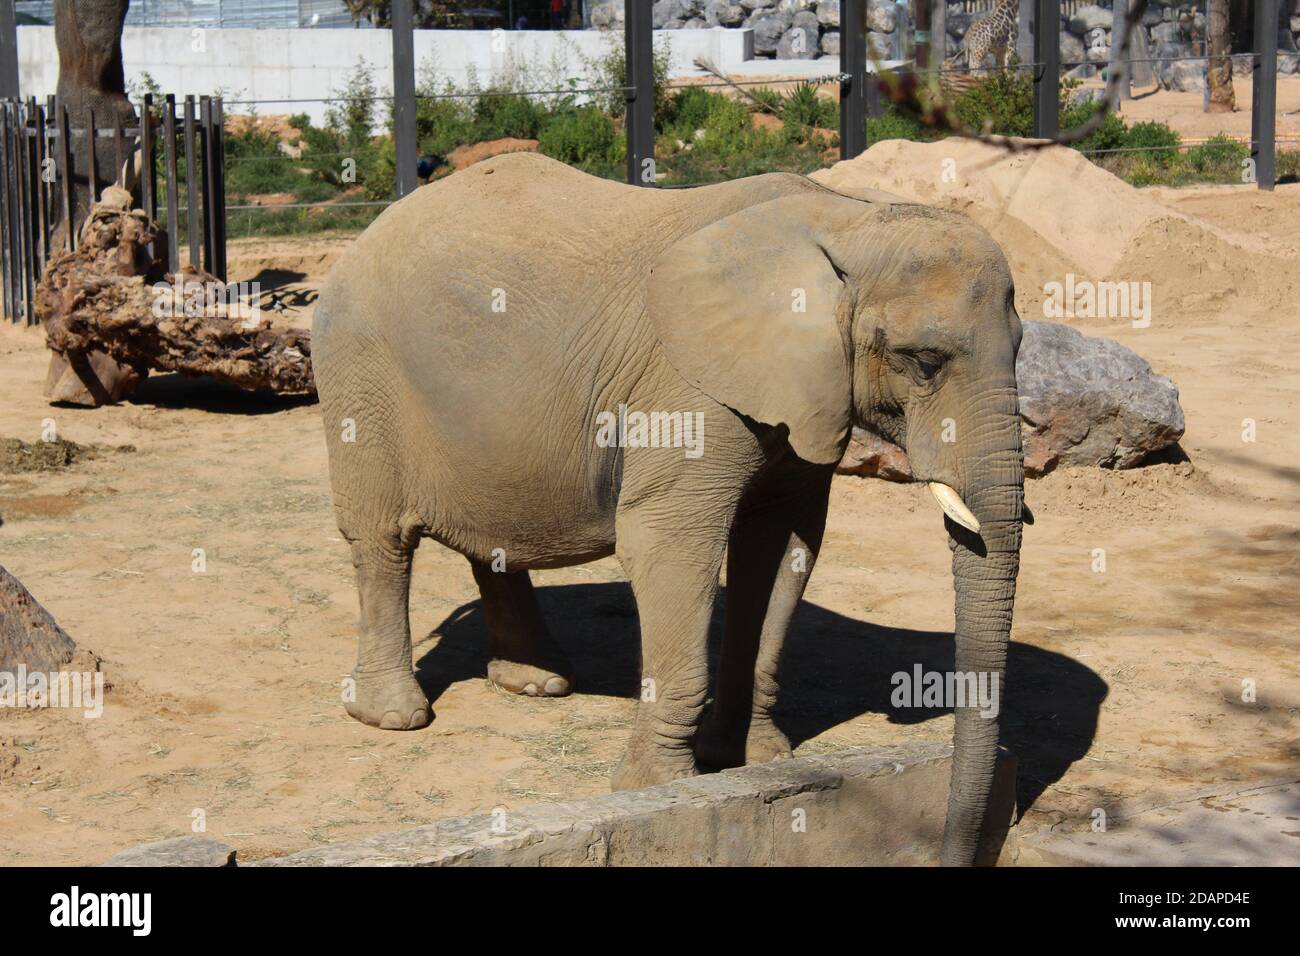 African elephant drinking water at the Barcelona zoo Stock Photo